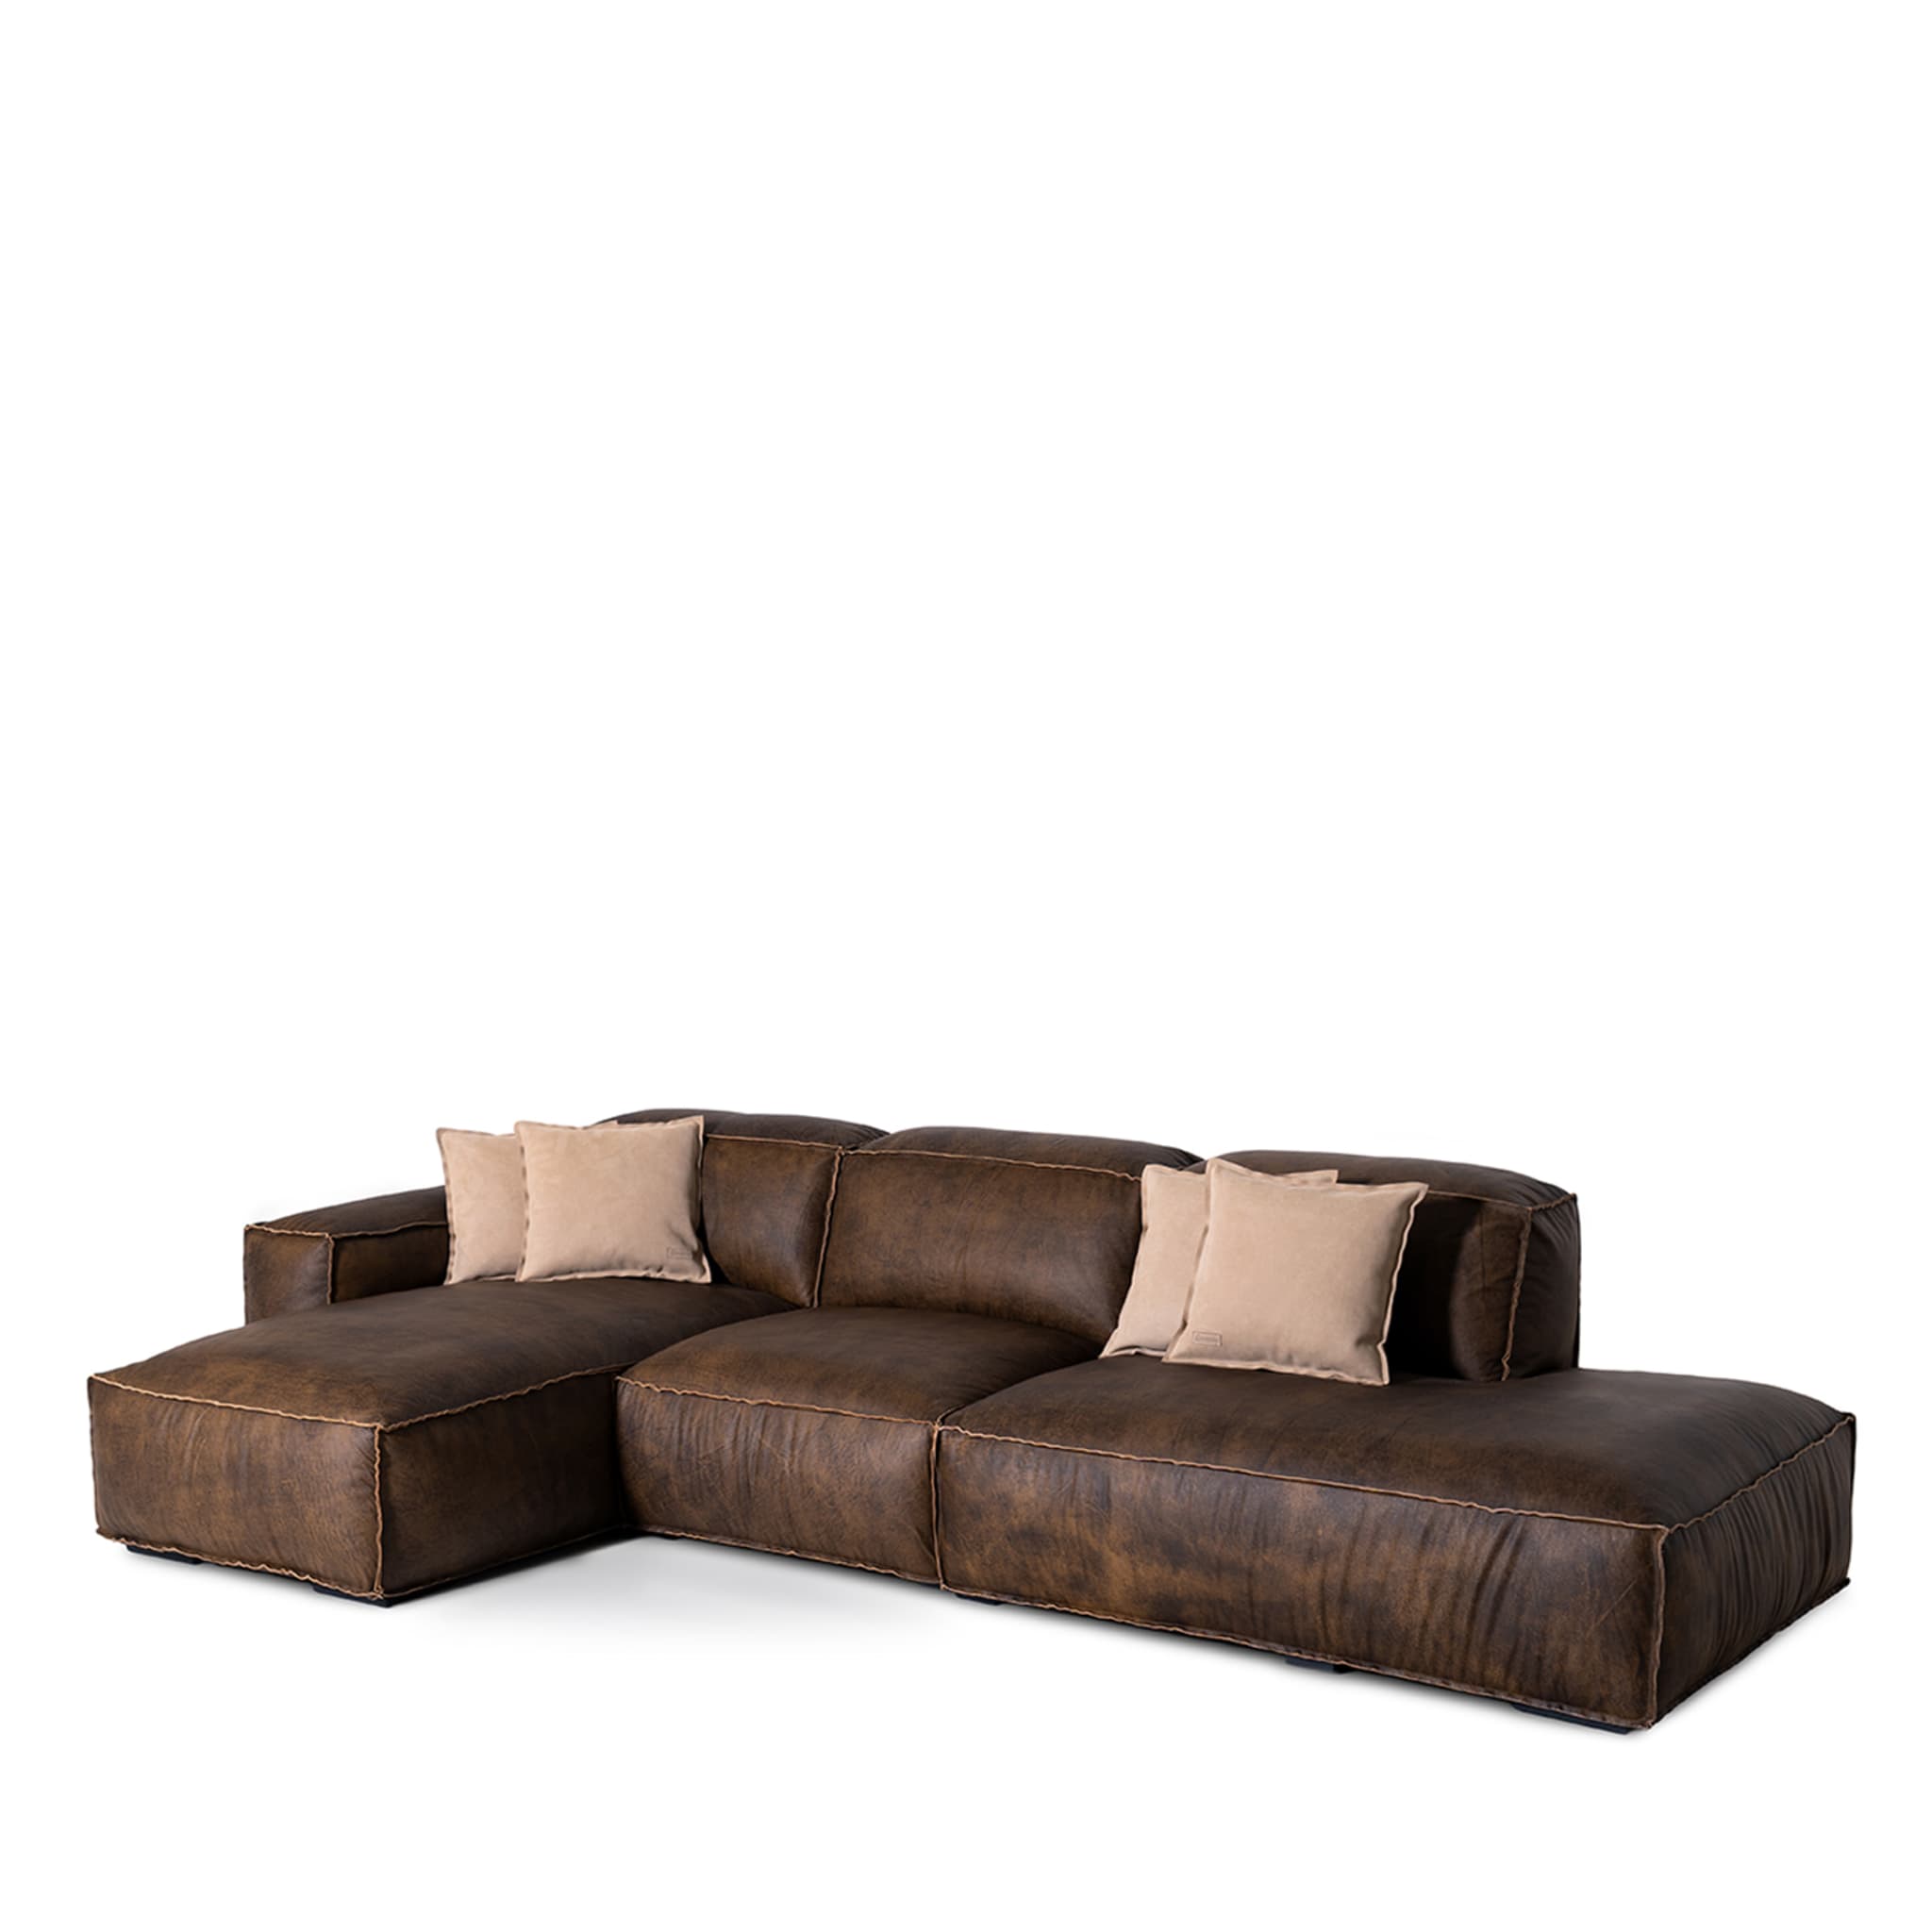 Placido Sofa with Chaise Longue and Free Side - Alternative view 2